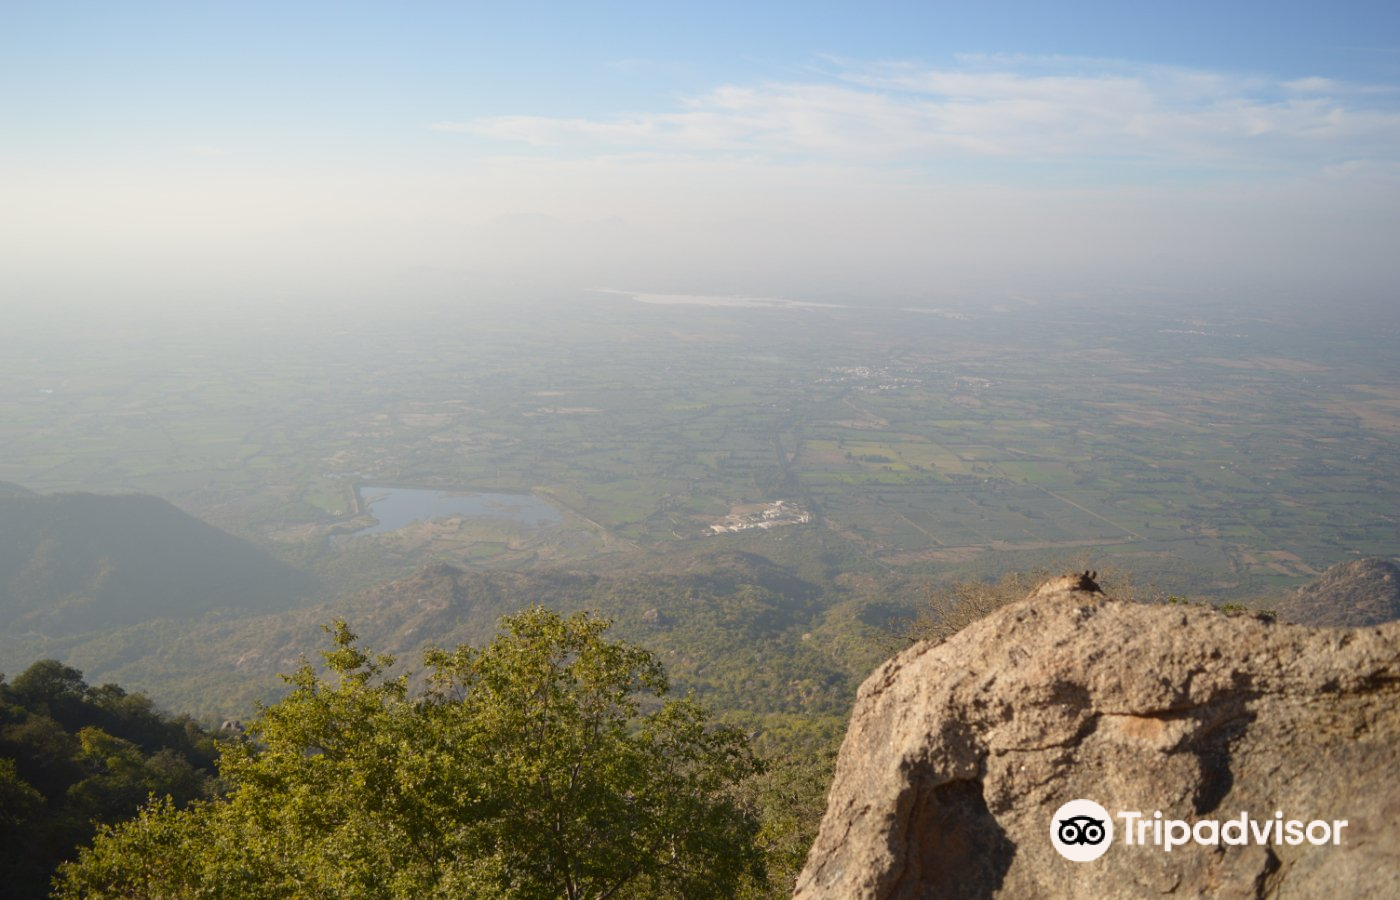 Mount Abu Itineraries, 24 Hours Itineraries In Mount Abu